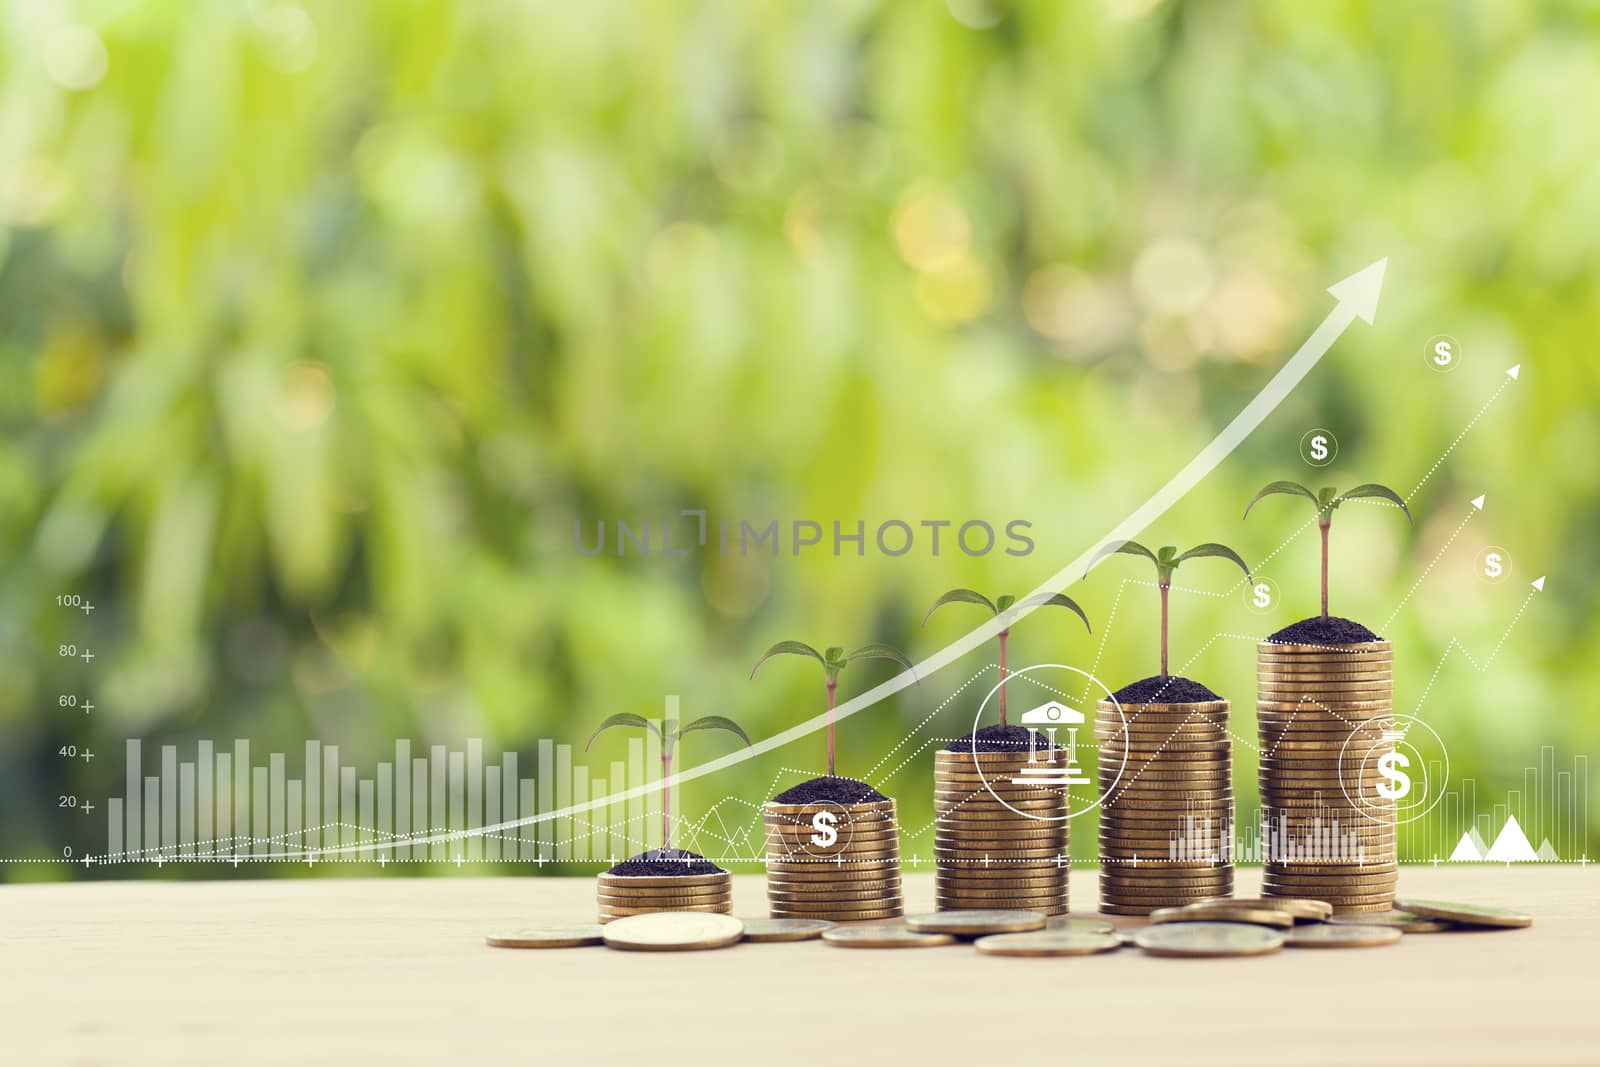 Finance and business concept: Double exposure with business charts of graph and green sprout on arranging rows of increasing coins. Stock investment for dividend and capital gain in a long-term growth